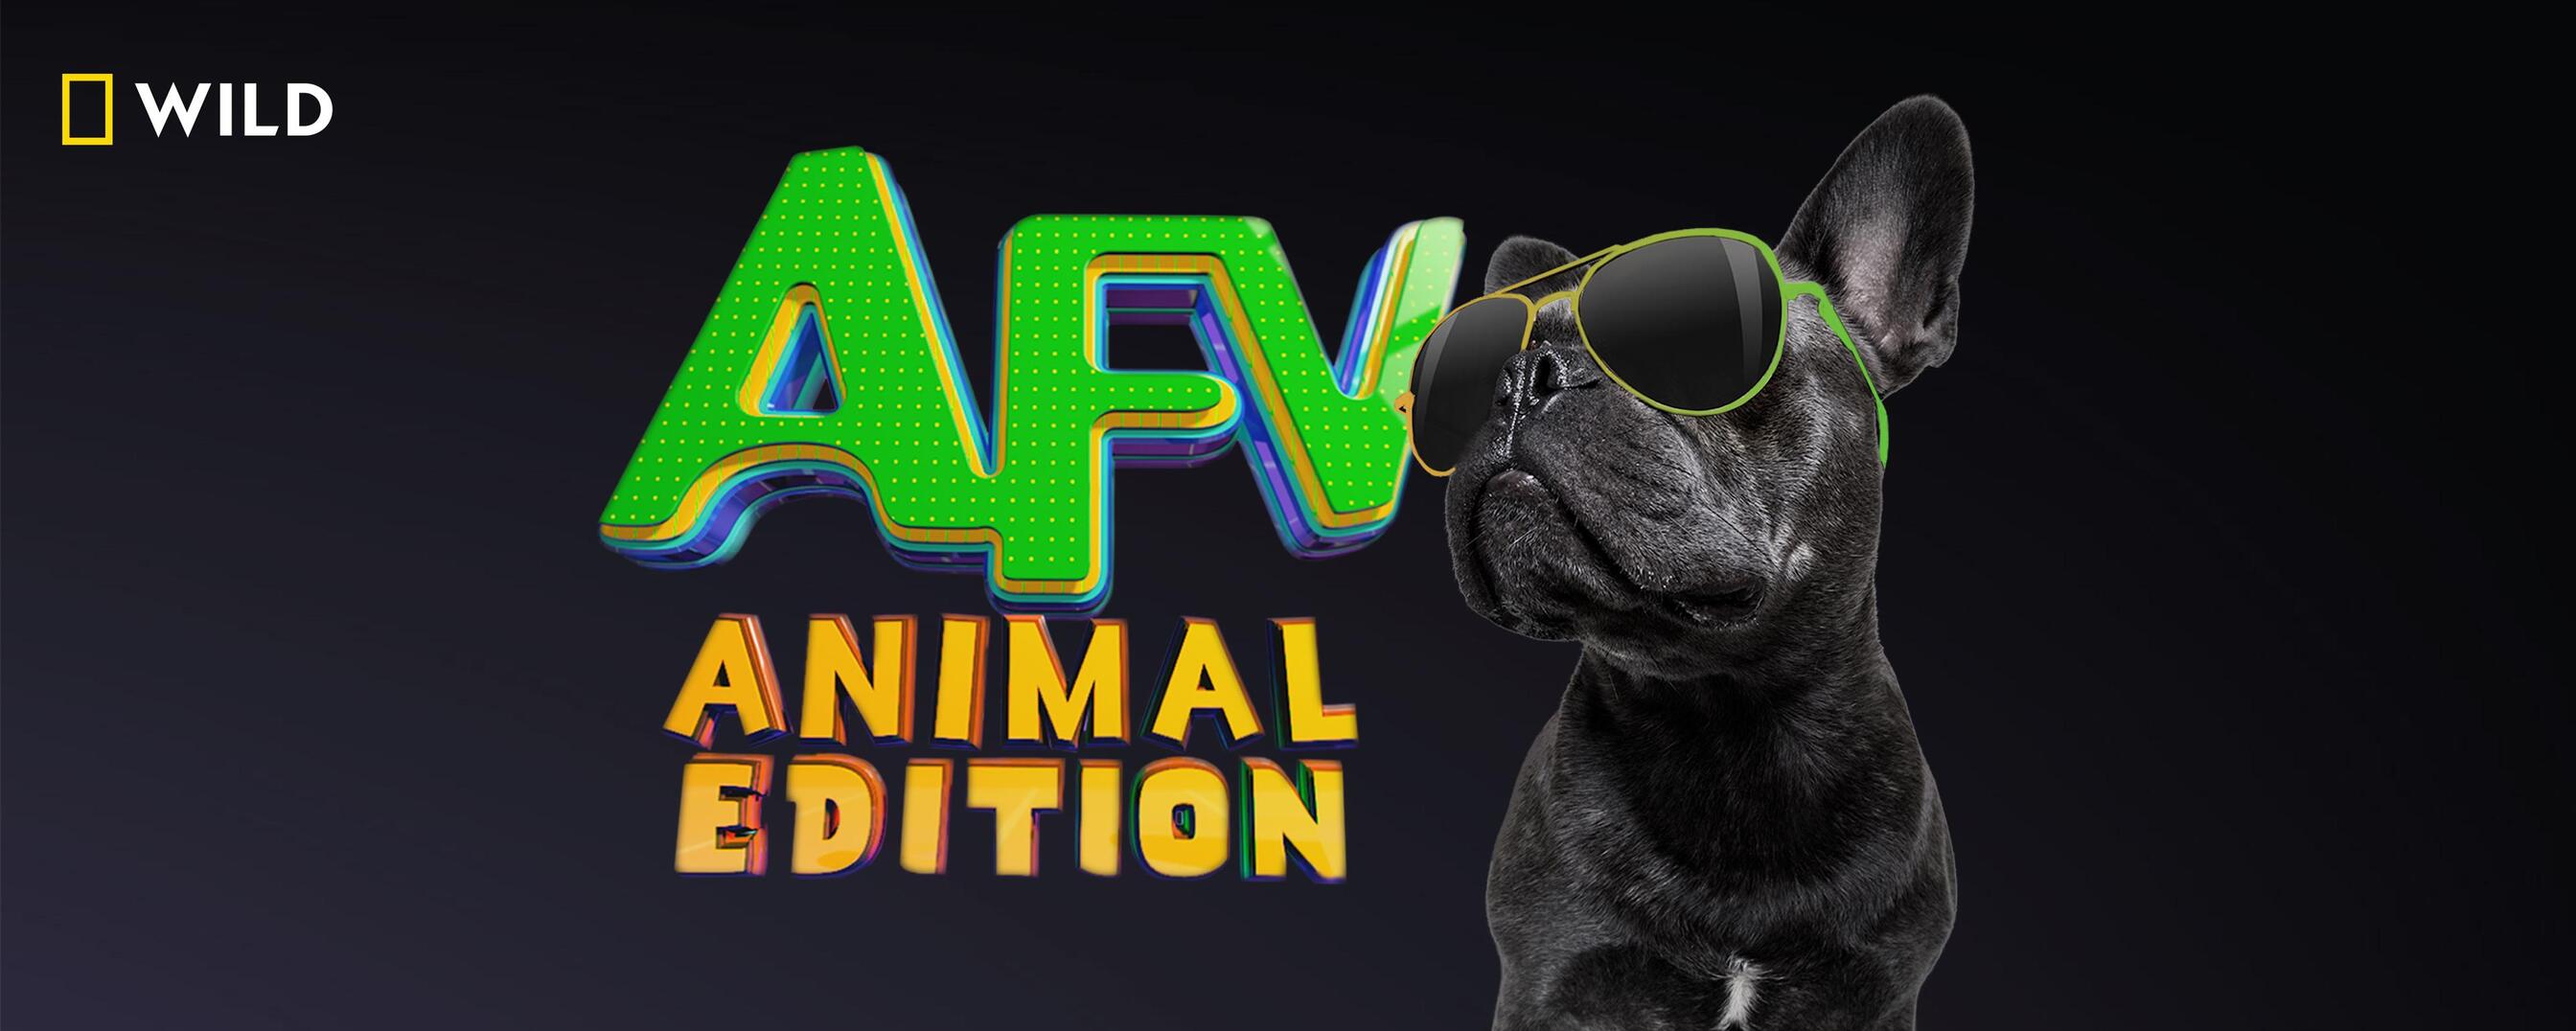 Watch America's Funniest Home Videos Animal Edition TV Show - Streaming  Online | Nat Geo TV